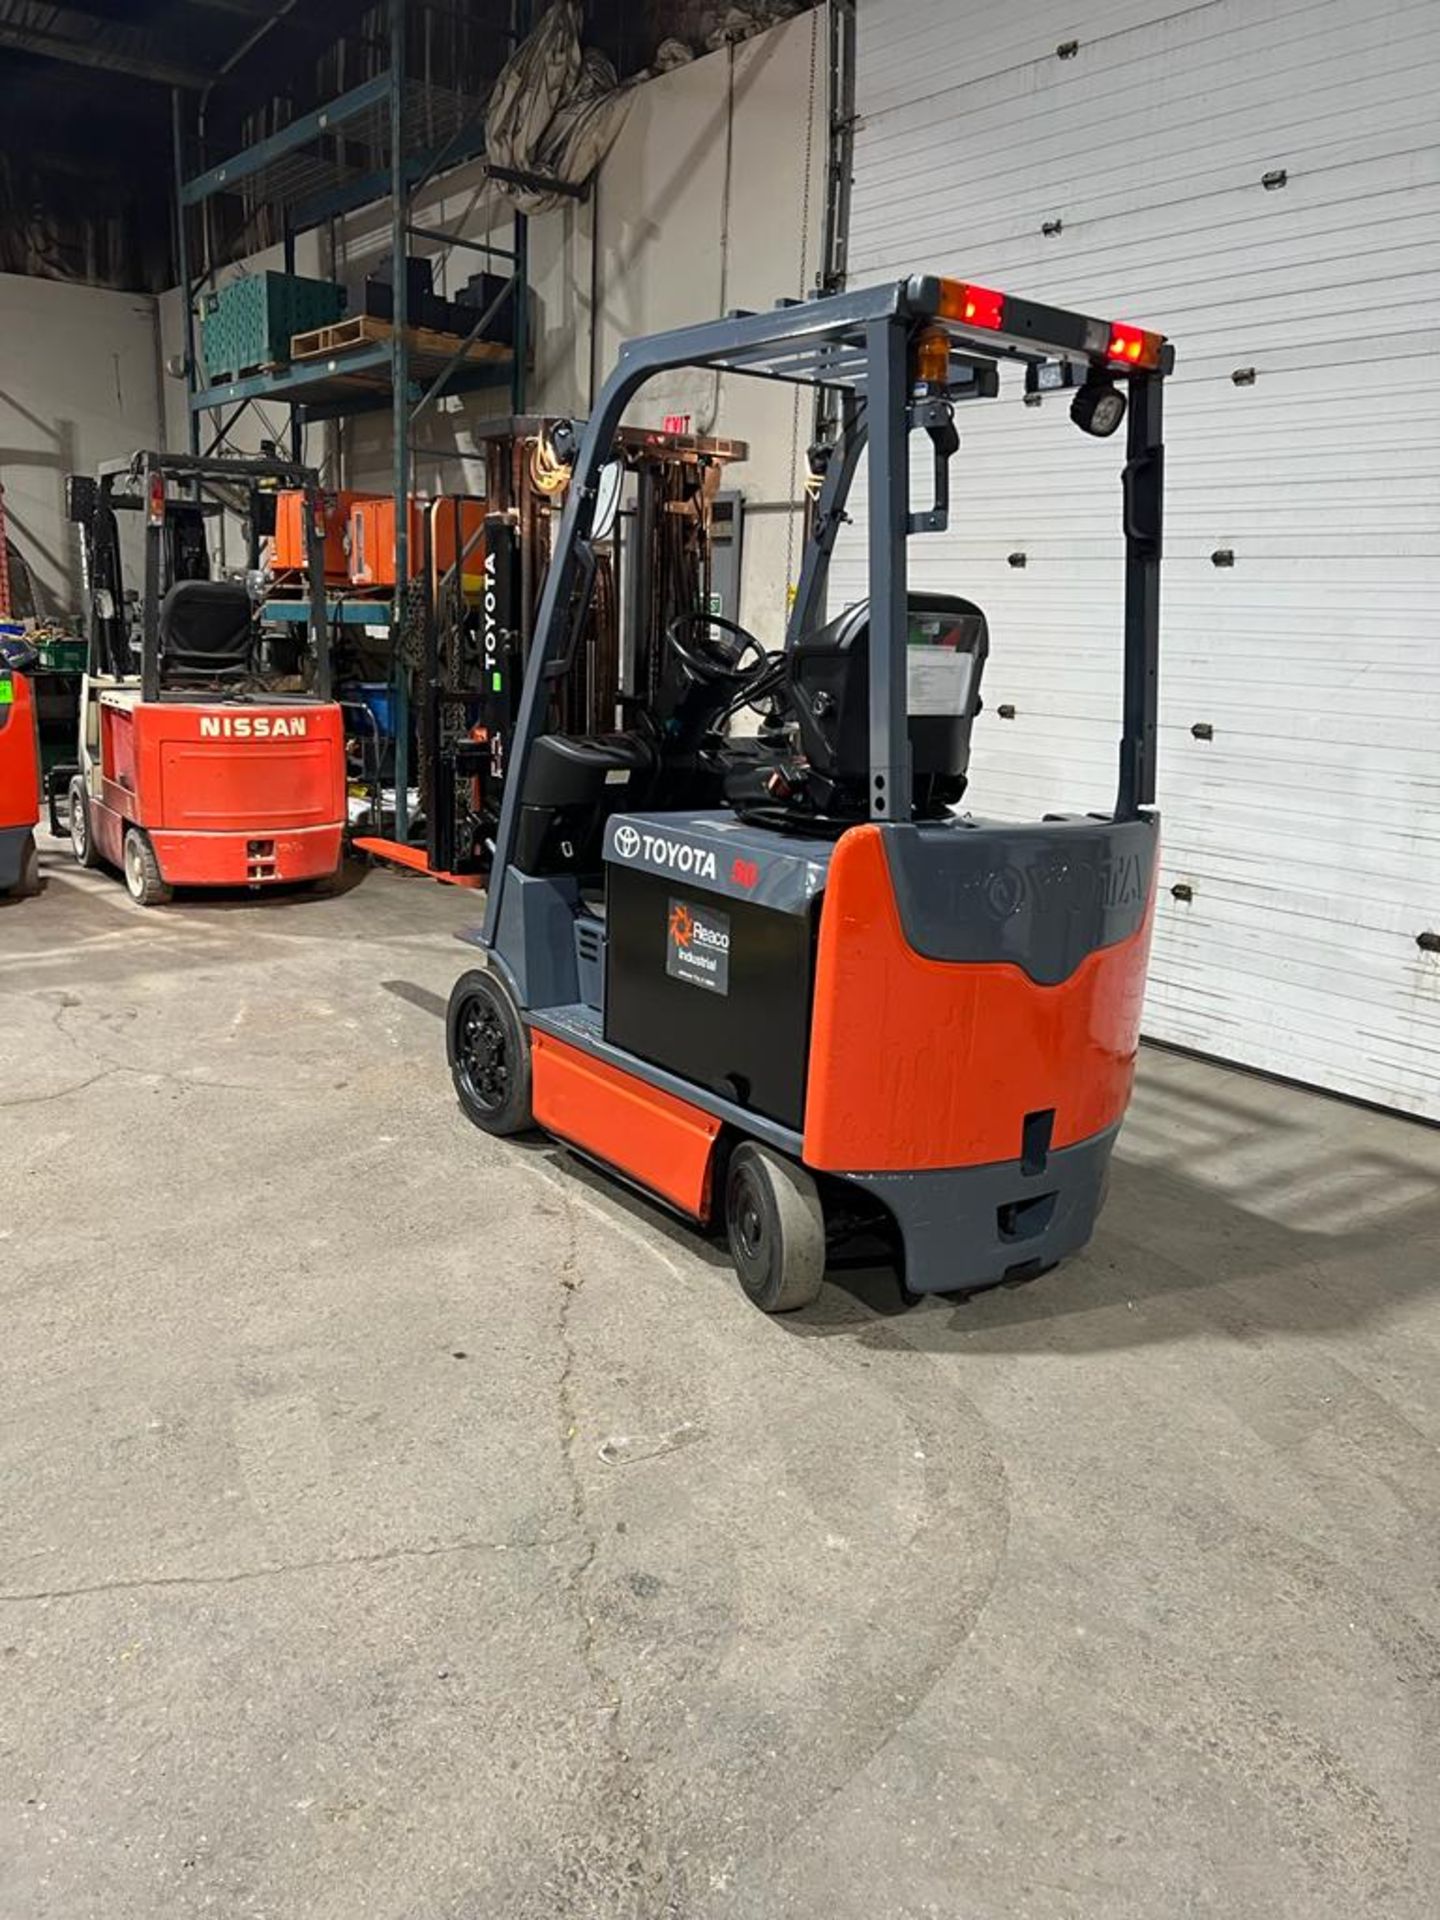 2014 Toyota 5,000lbs Capacity Forklift Electric 48V with 48" FORKS with Sideshift & Plumbed for Fork - Image 5 of 5